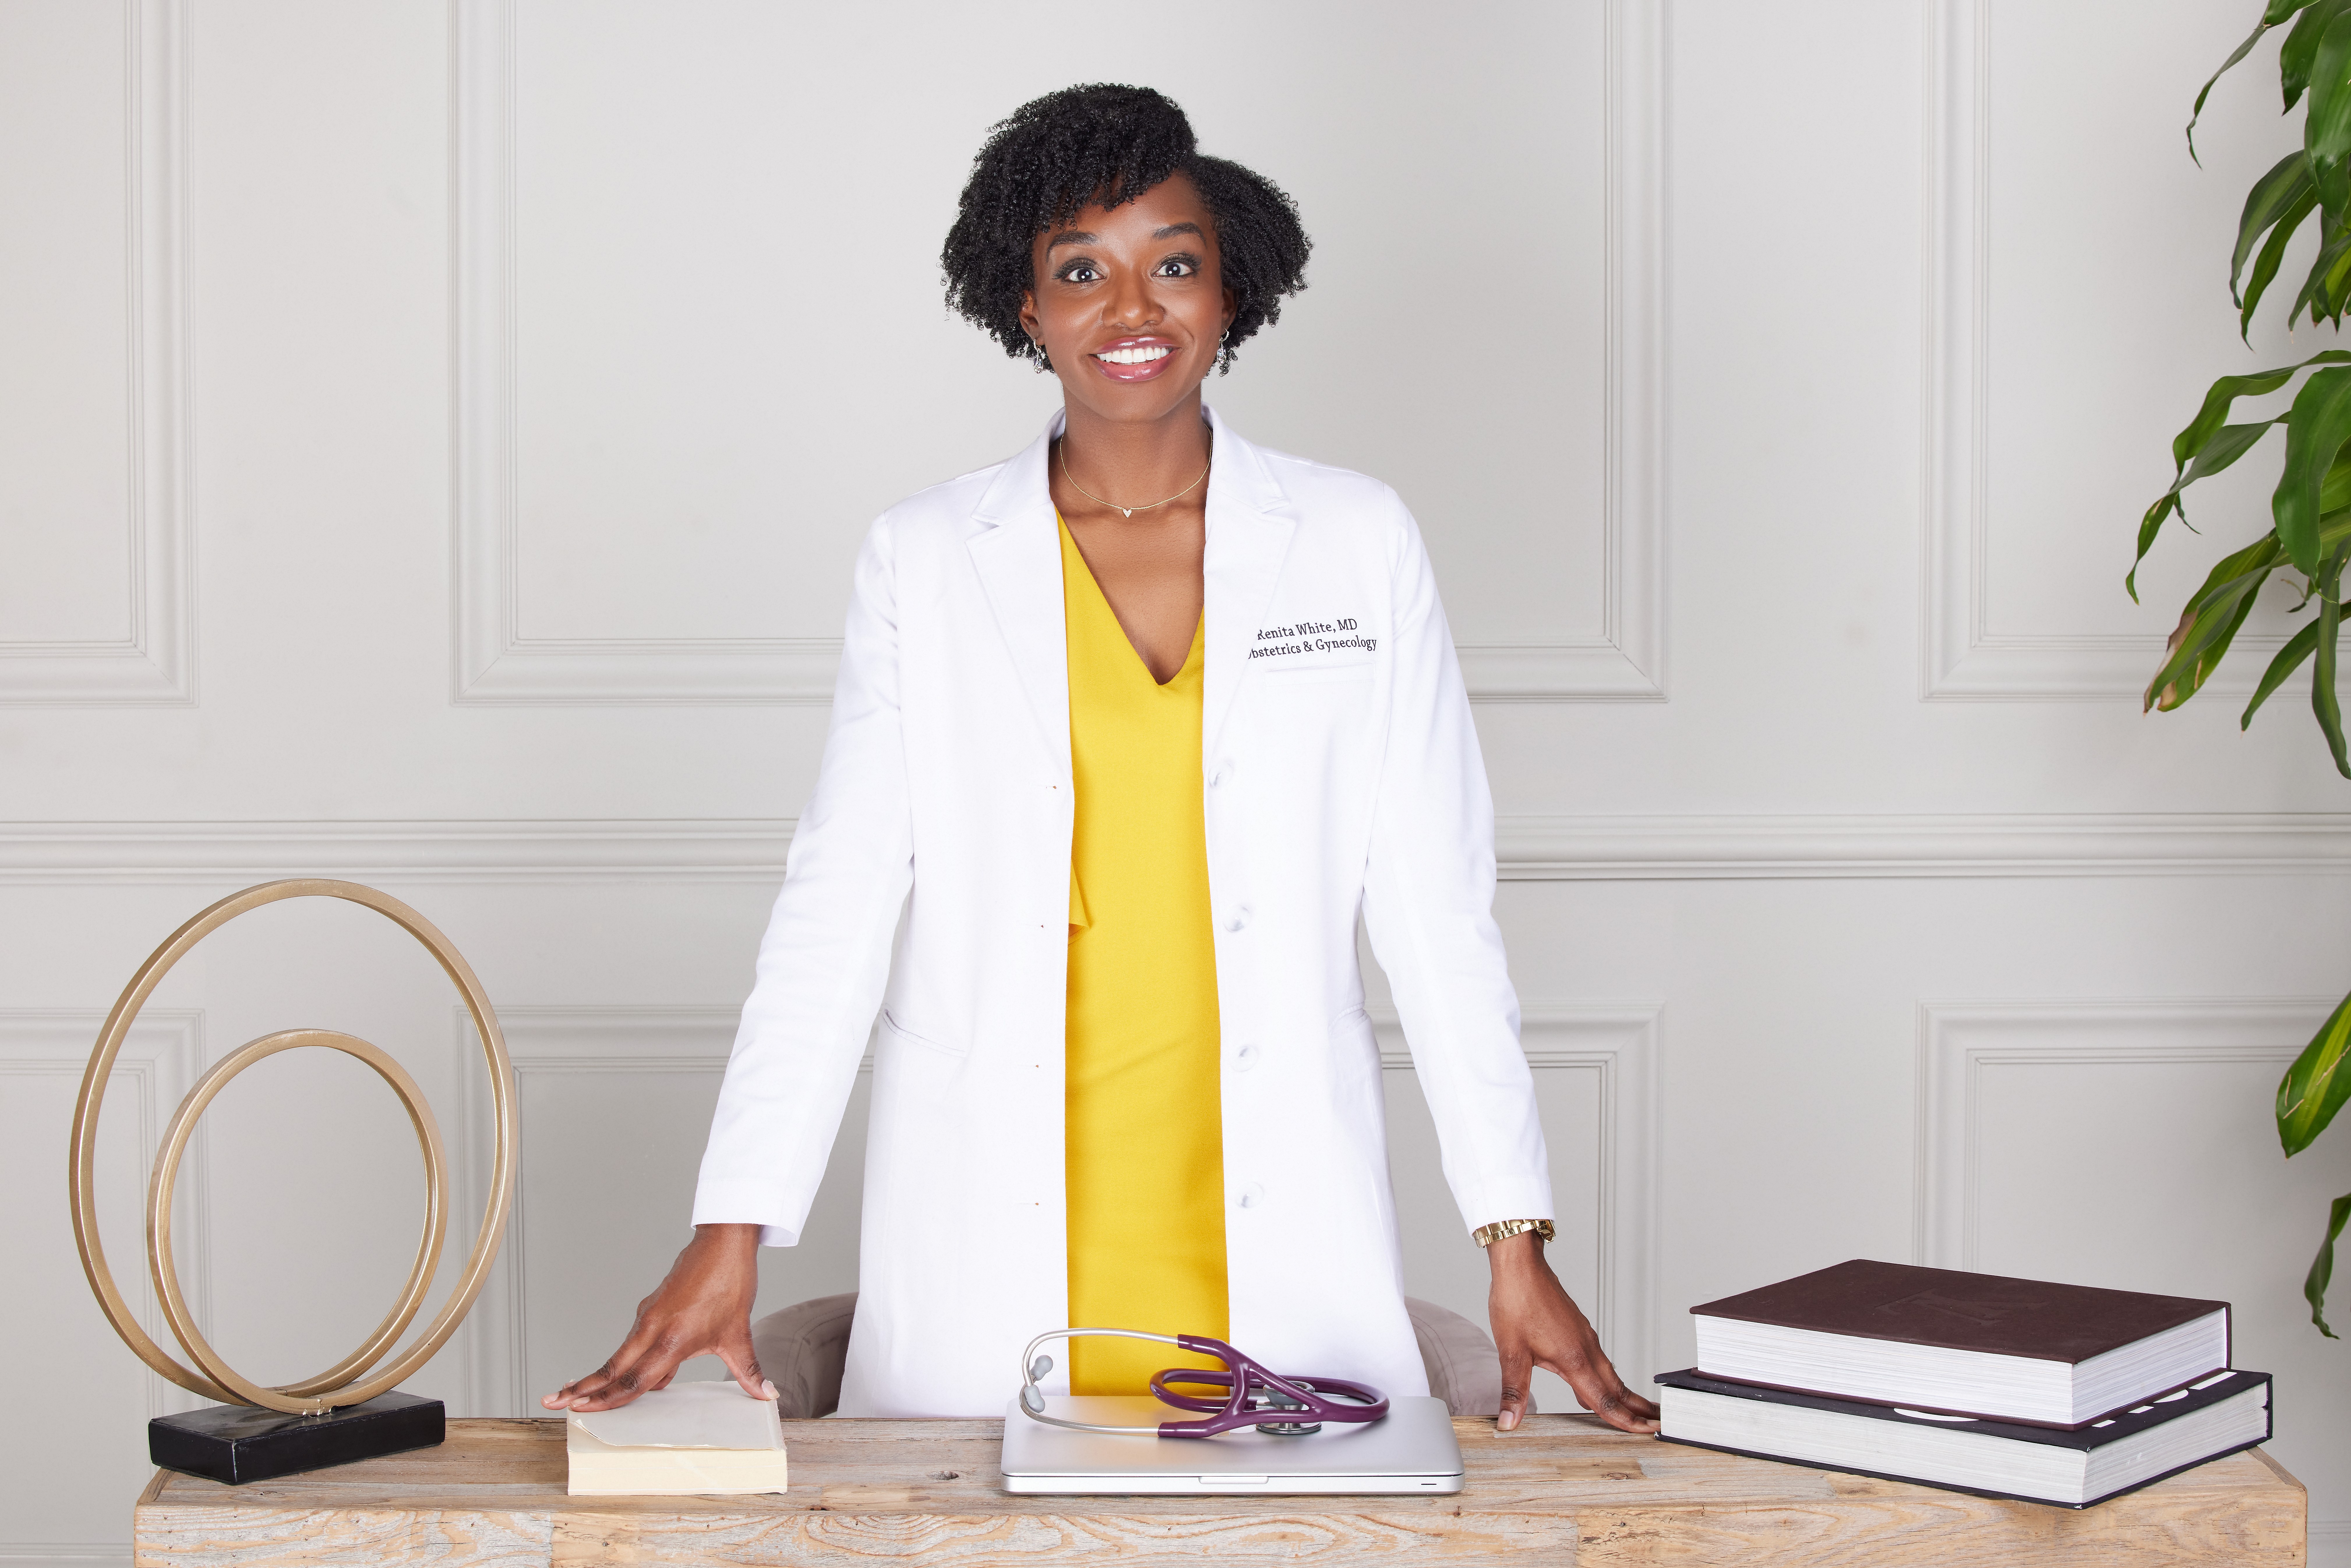 Cradle and All… It takes two - Renita White MD